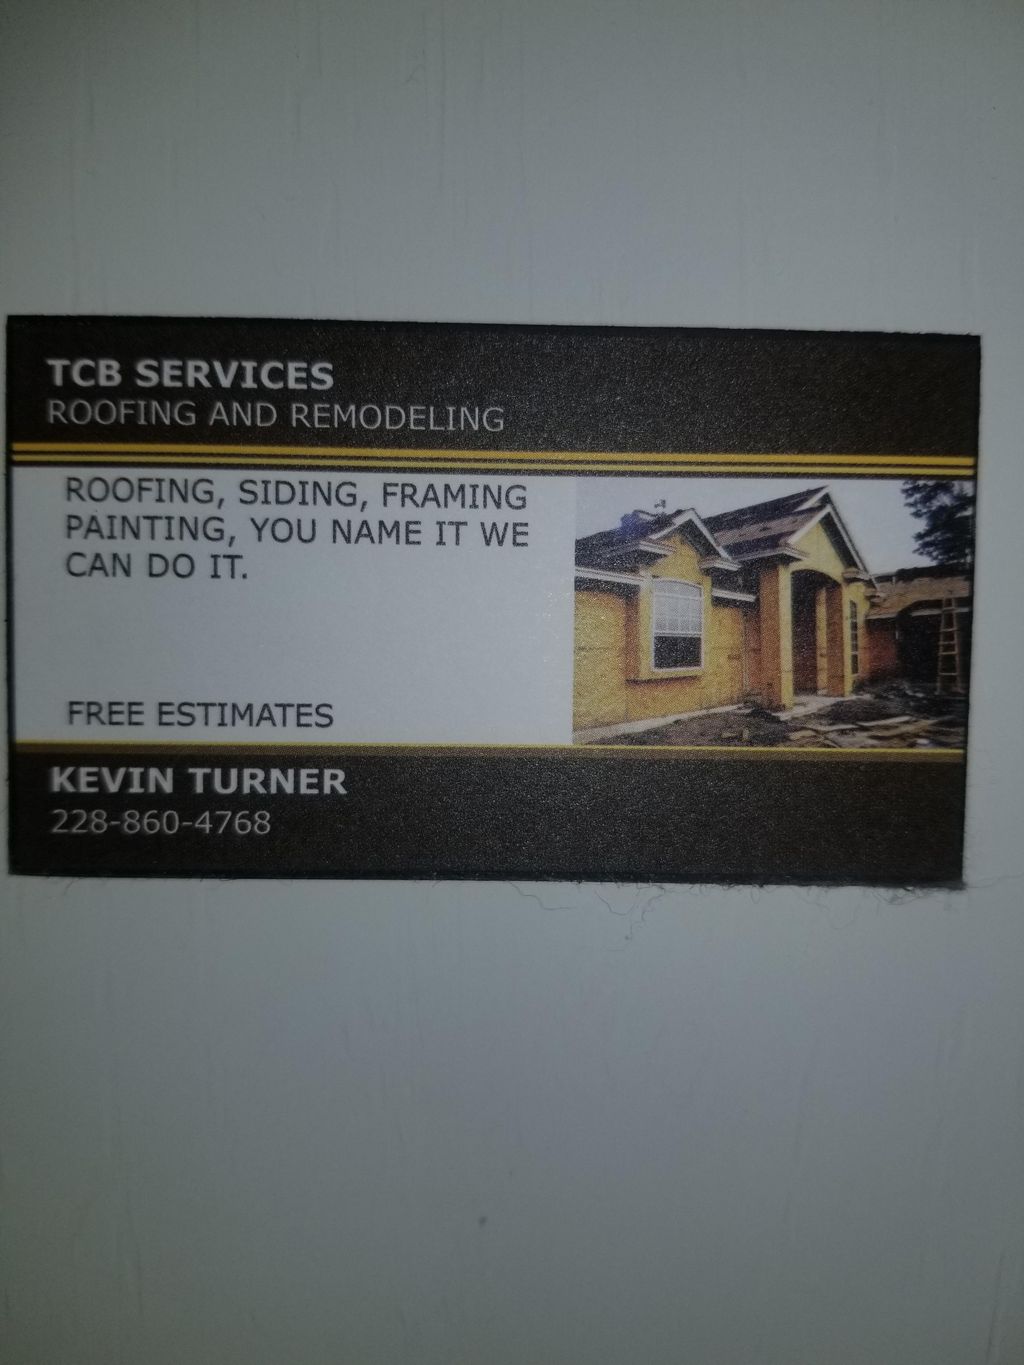 TCB Roofing and Services